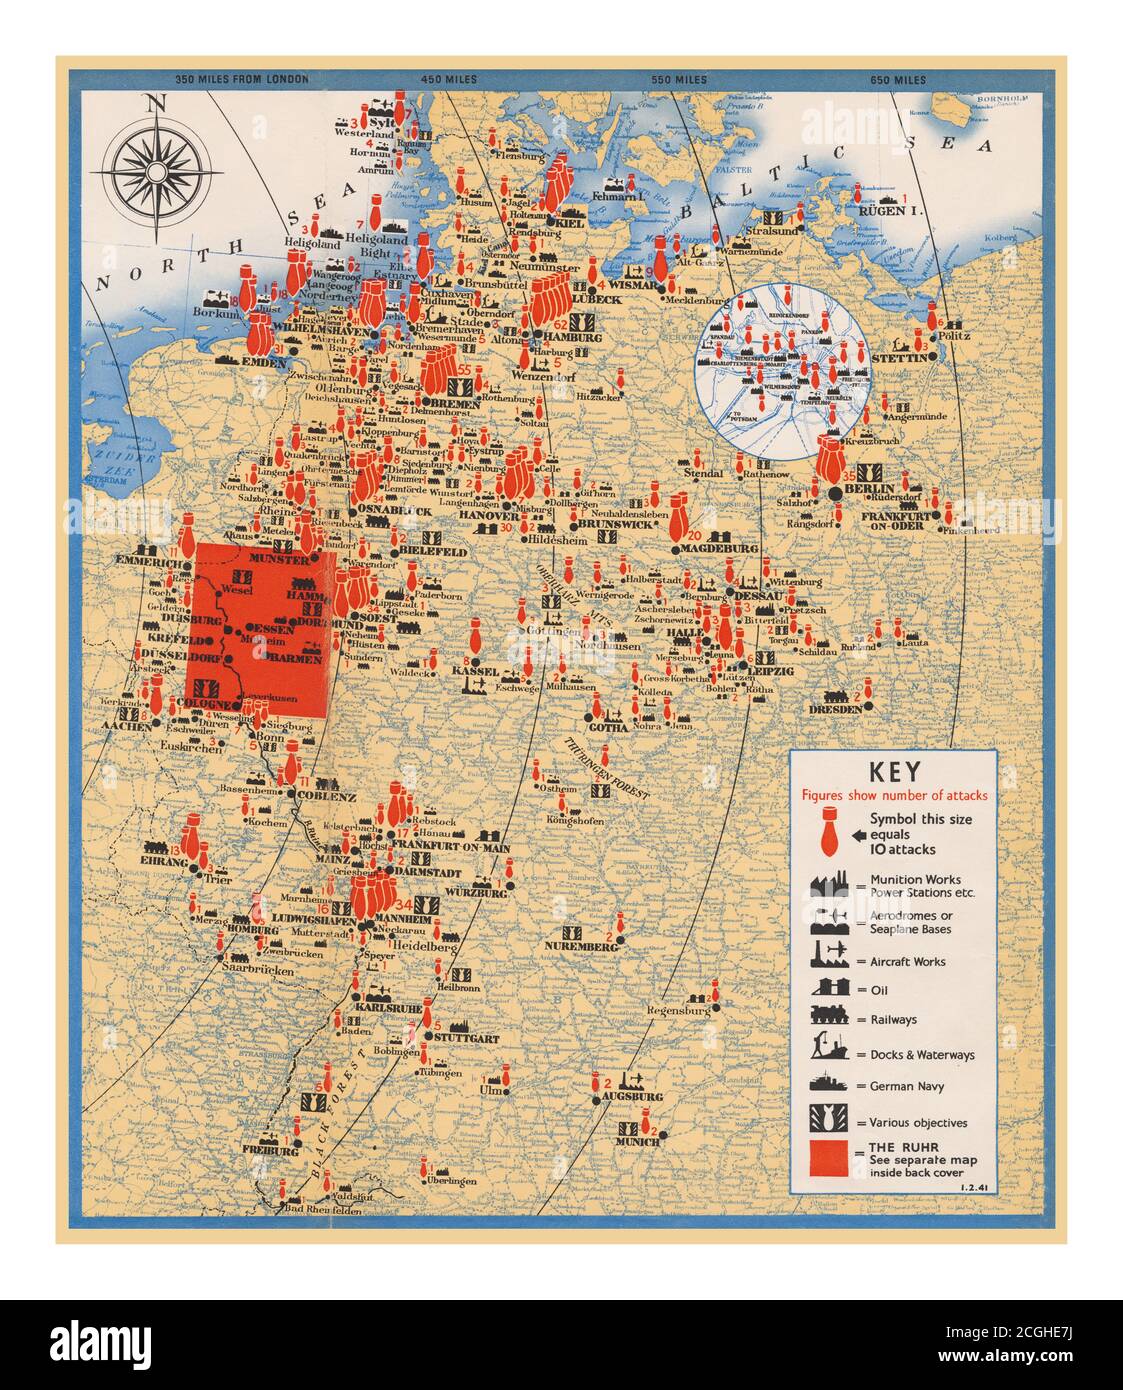 Bombing Map of Germany and Adjacent Areas WW2 1943 pictorial map POSTER 0111 